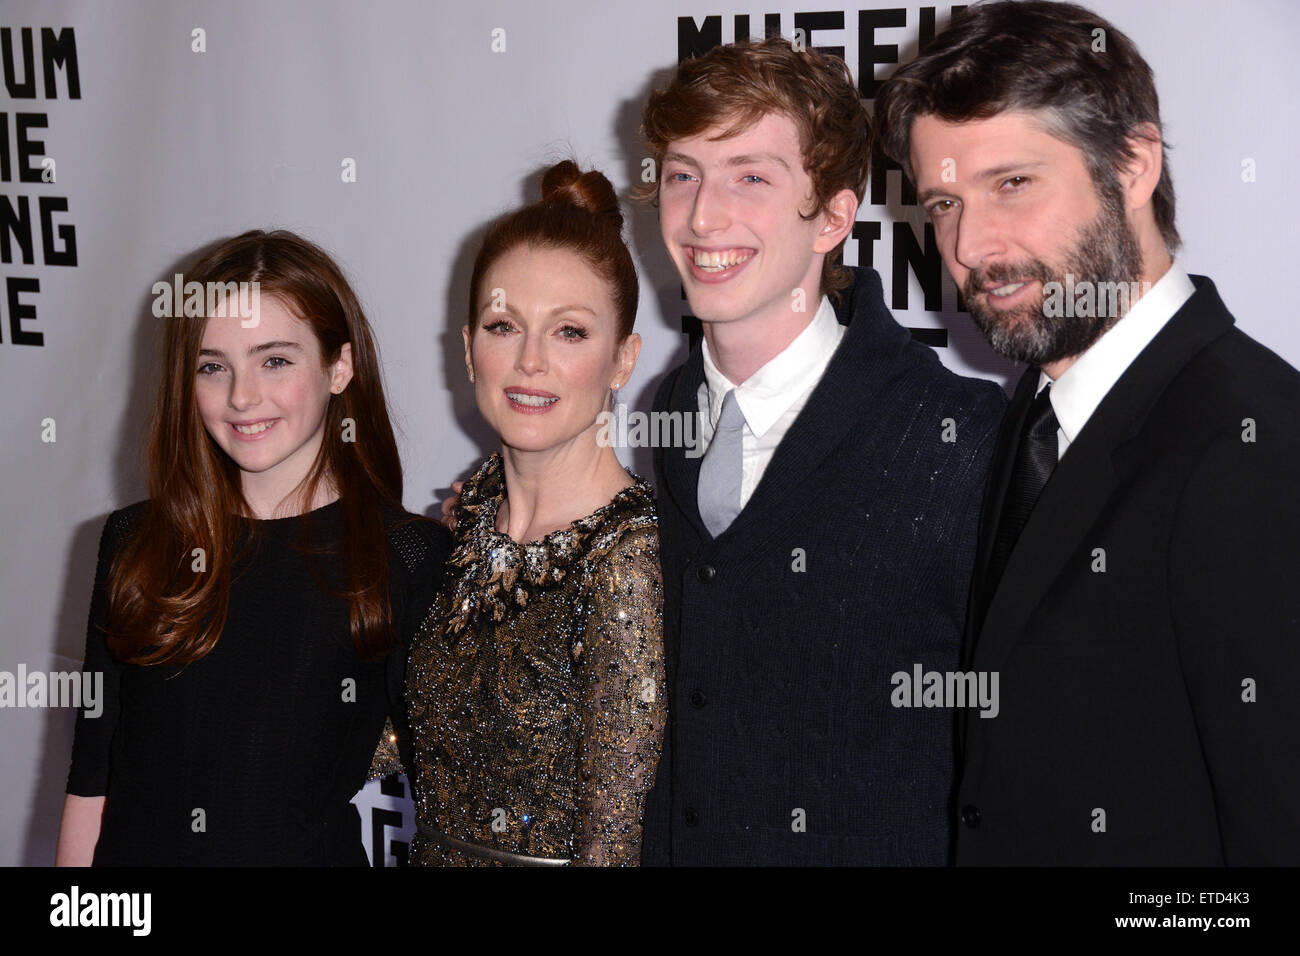 Museum Of The Moving Image Honors Julianne Moore - Red Carpet Arrivals  Featuring: Liv Freundlich, Julianne Moore, Caleb Freundlich, Bart Freundlich Where: New York City, New York, United States When: 20 Jan 2015 Credit: Ivan Nikolov/WENN.com Stock Photo